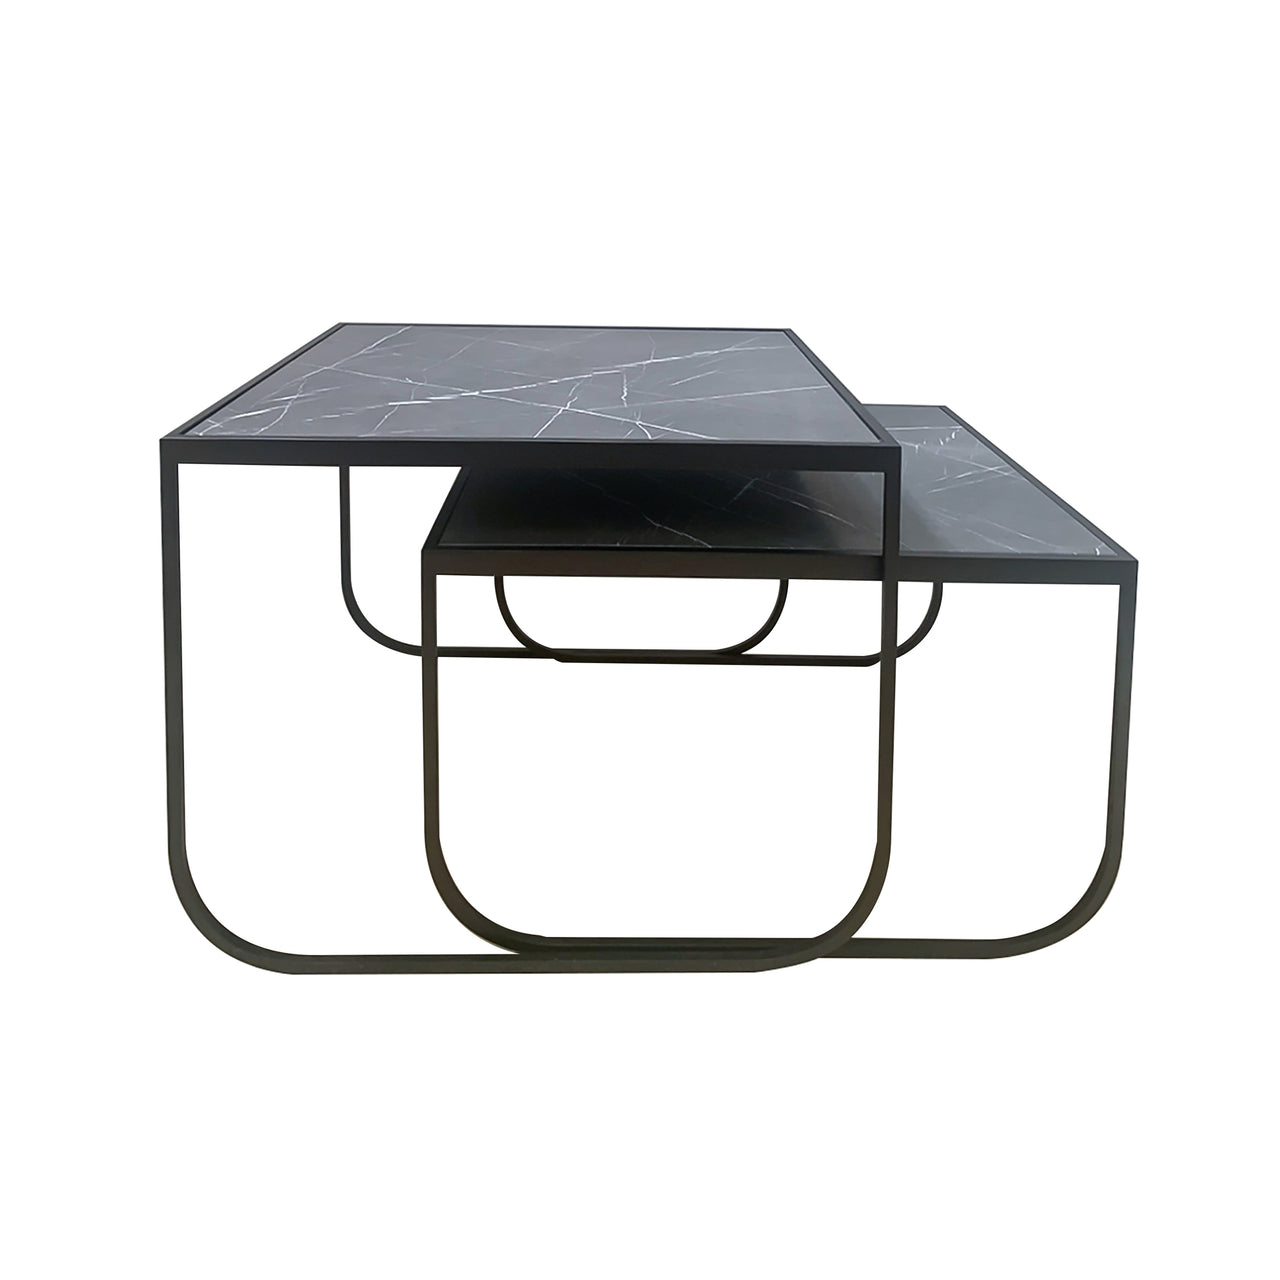 Tati Coffee Table: Square + Marble Top + High + Low + Pietra Grey Marble + Char Grey